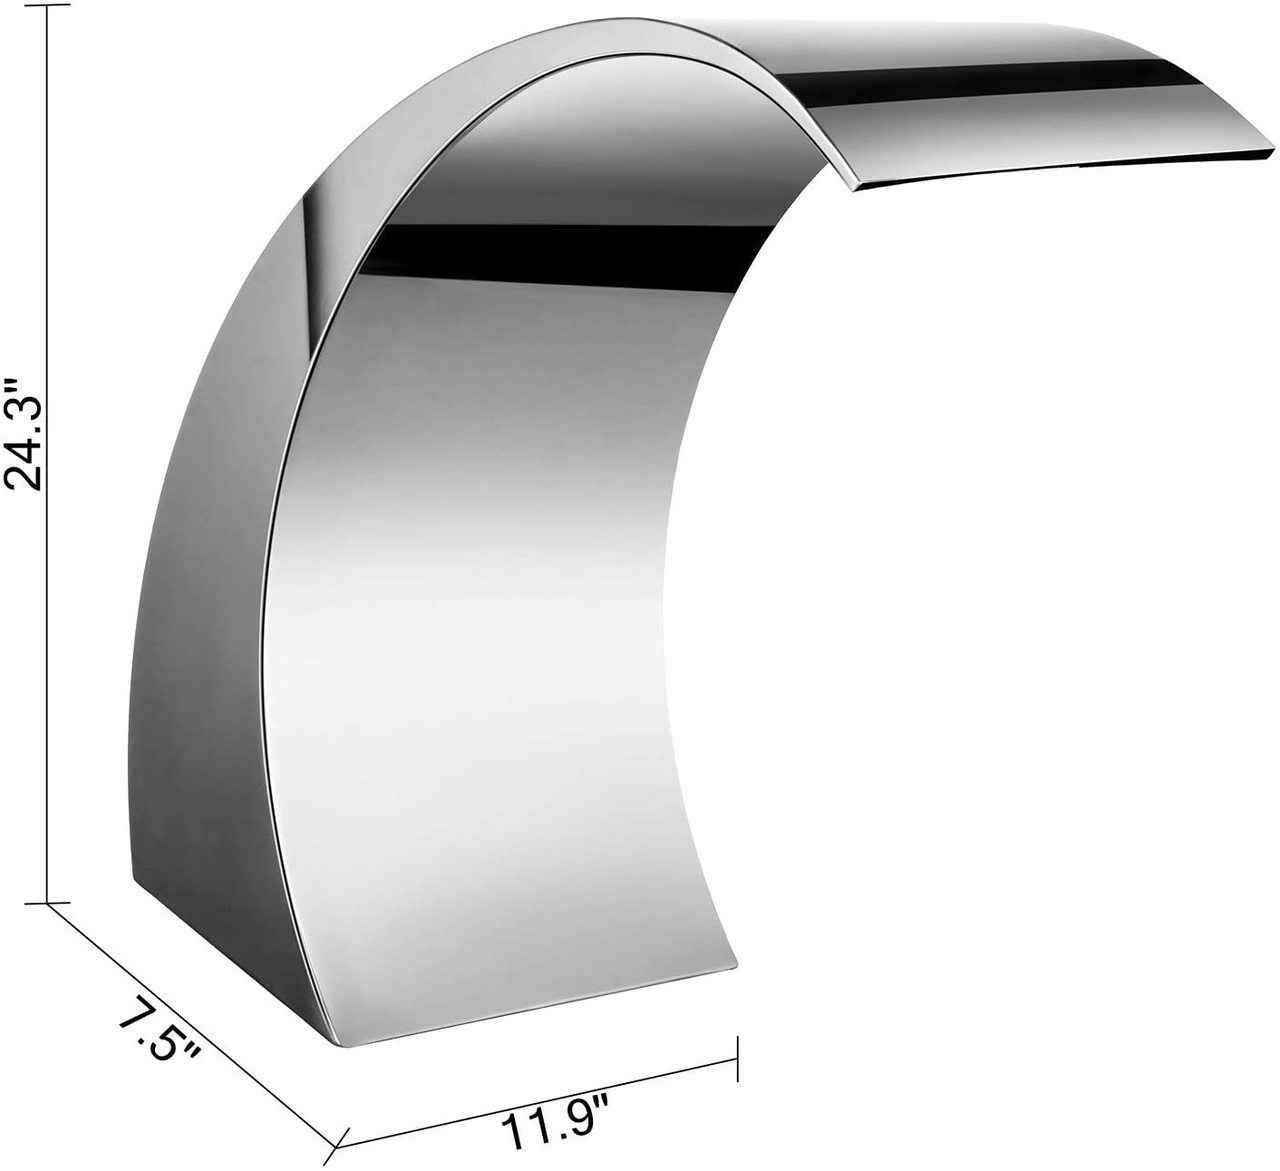 59" wide Details about   Waterfall Pool Fountain Rectangular Stainless Steel  ~ CHOOSE 11.8" 